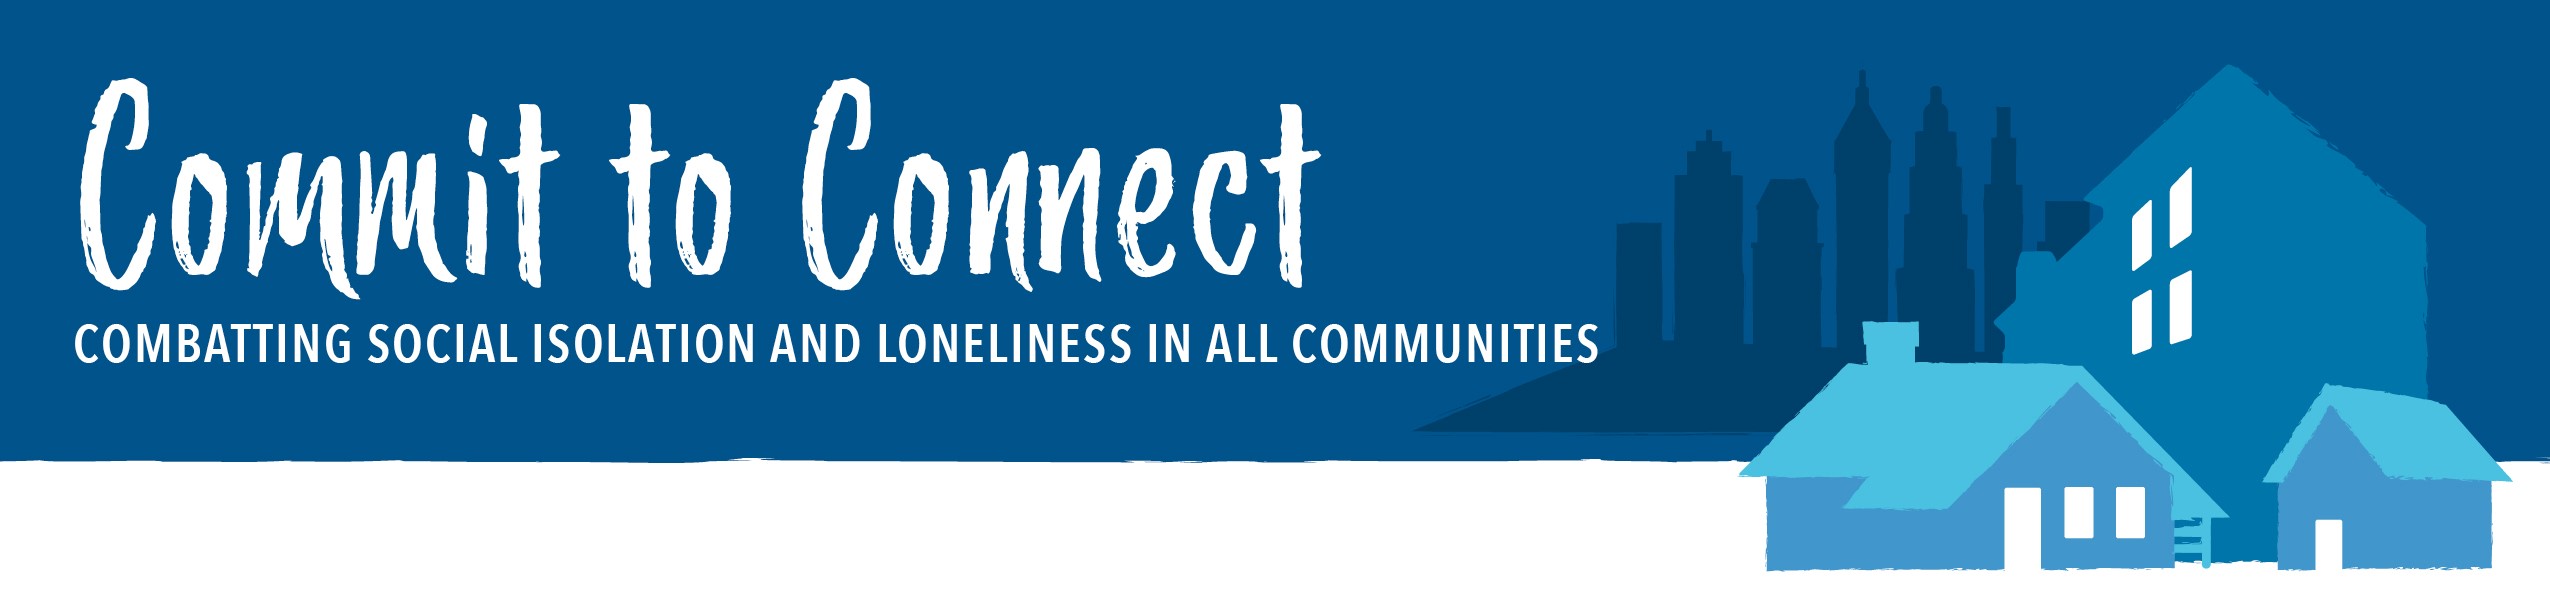 Commit to Connect: Combatting Social Isolation and Loneliness in All Communities